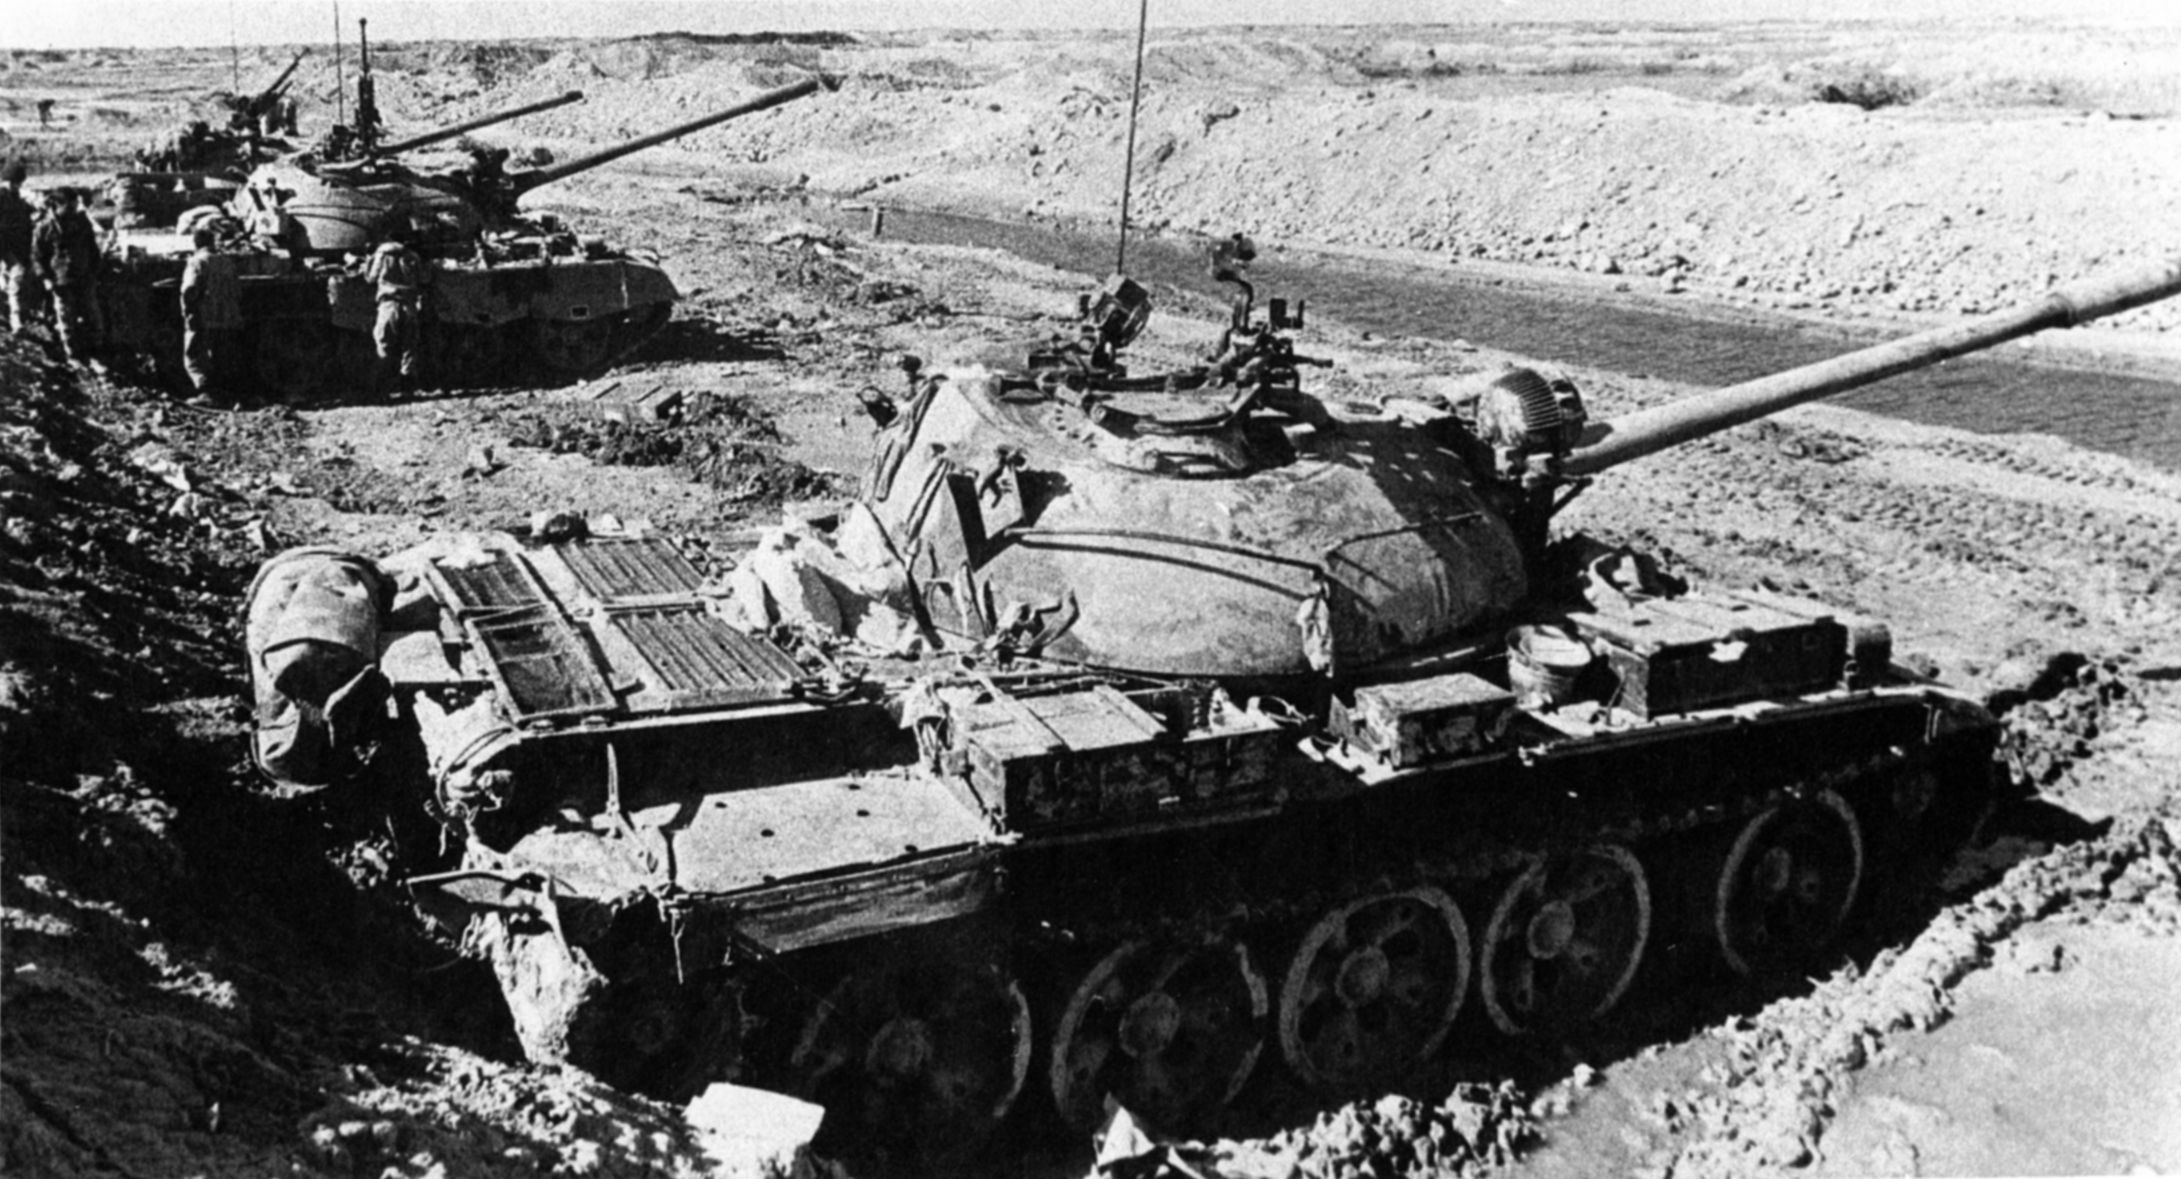 The Iranians had to husband their heavy weapons carefully during the war, due to problems with repair and maintenance.